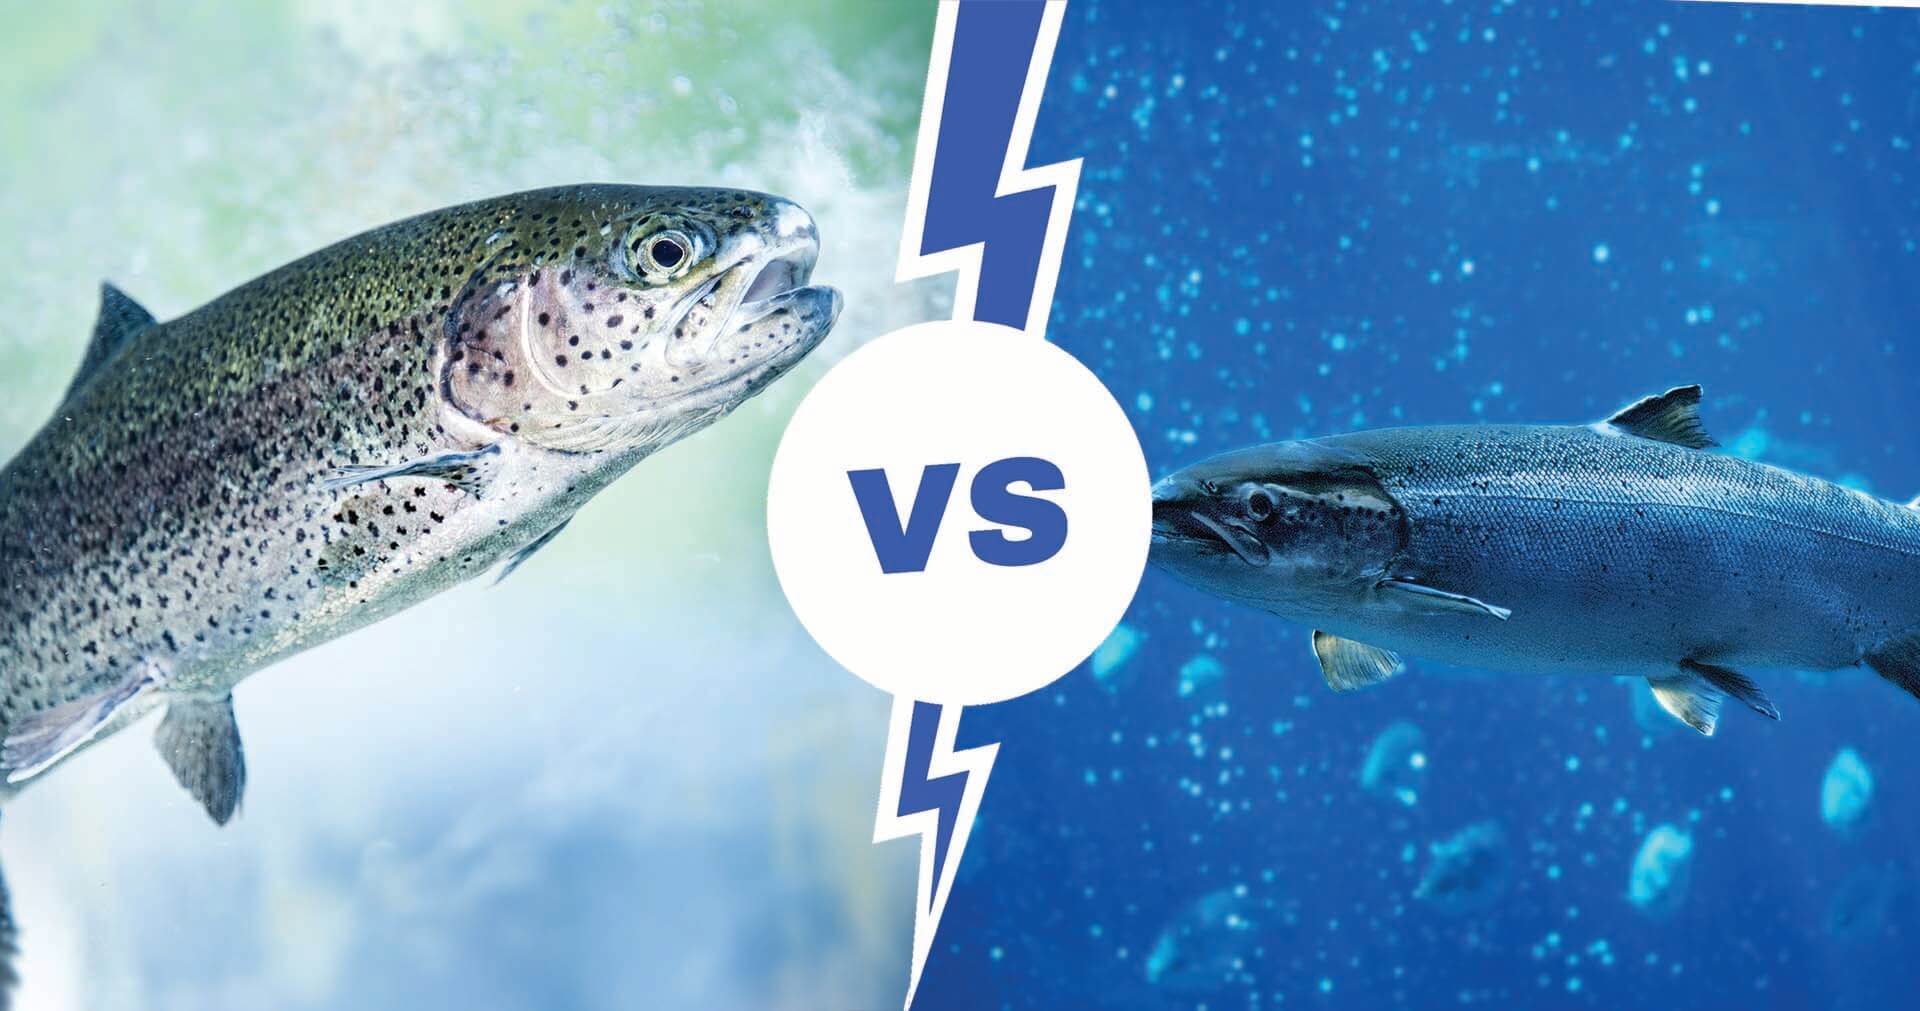 Trout vs salmon featured image